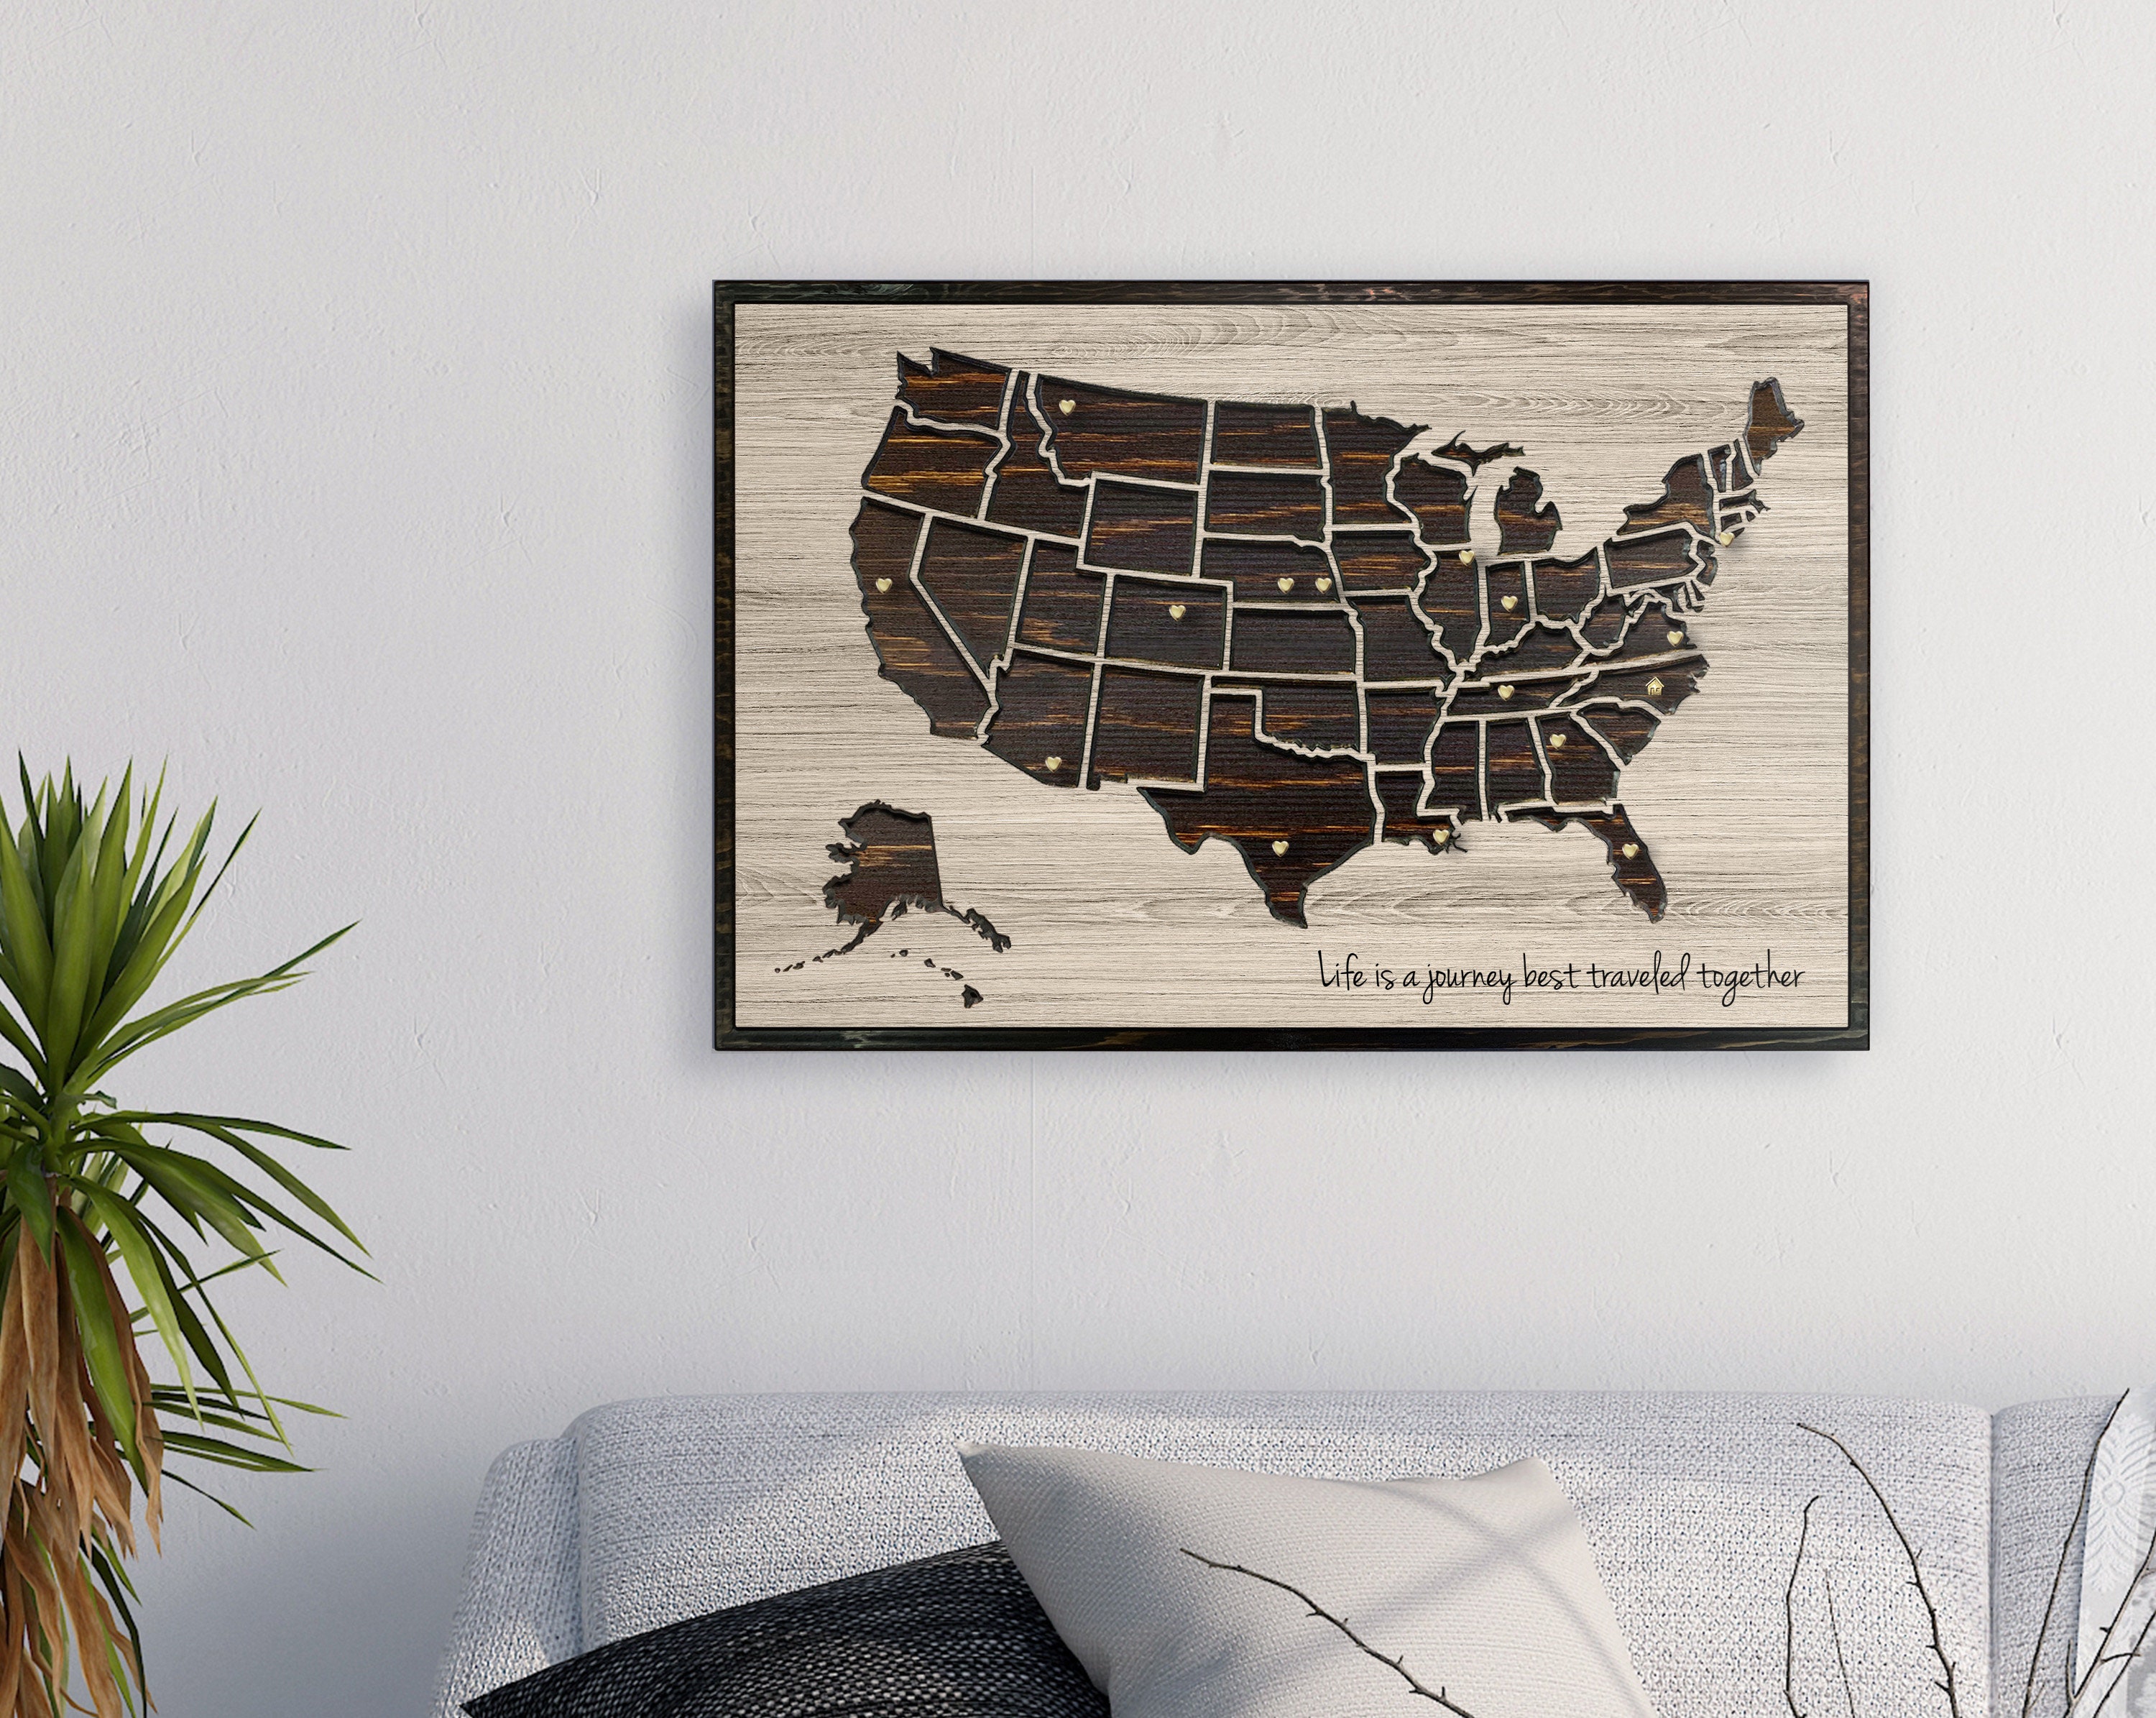 Life Is A Journey Best Traveled Together, Push Pin Friendly Map To Track Travel, Wood Us Wall Art, 3D Carved States, Made in America